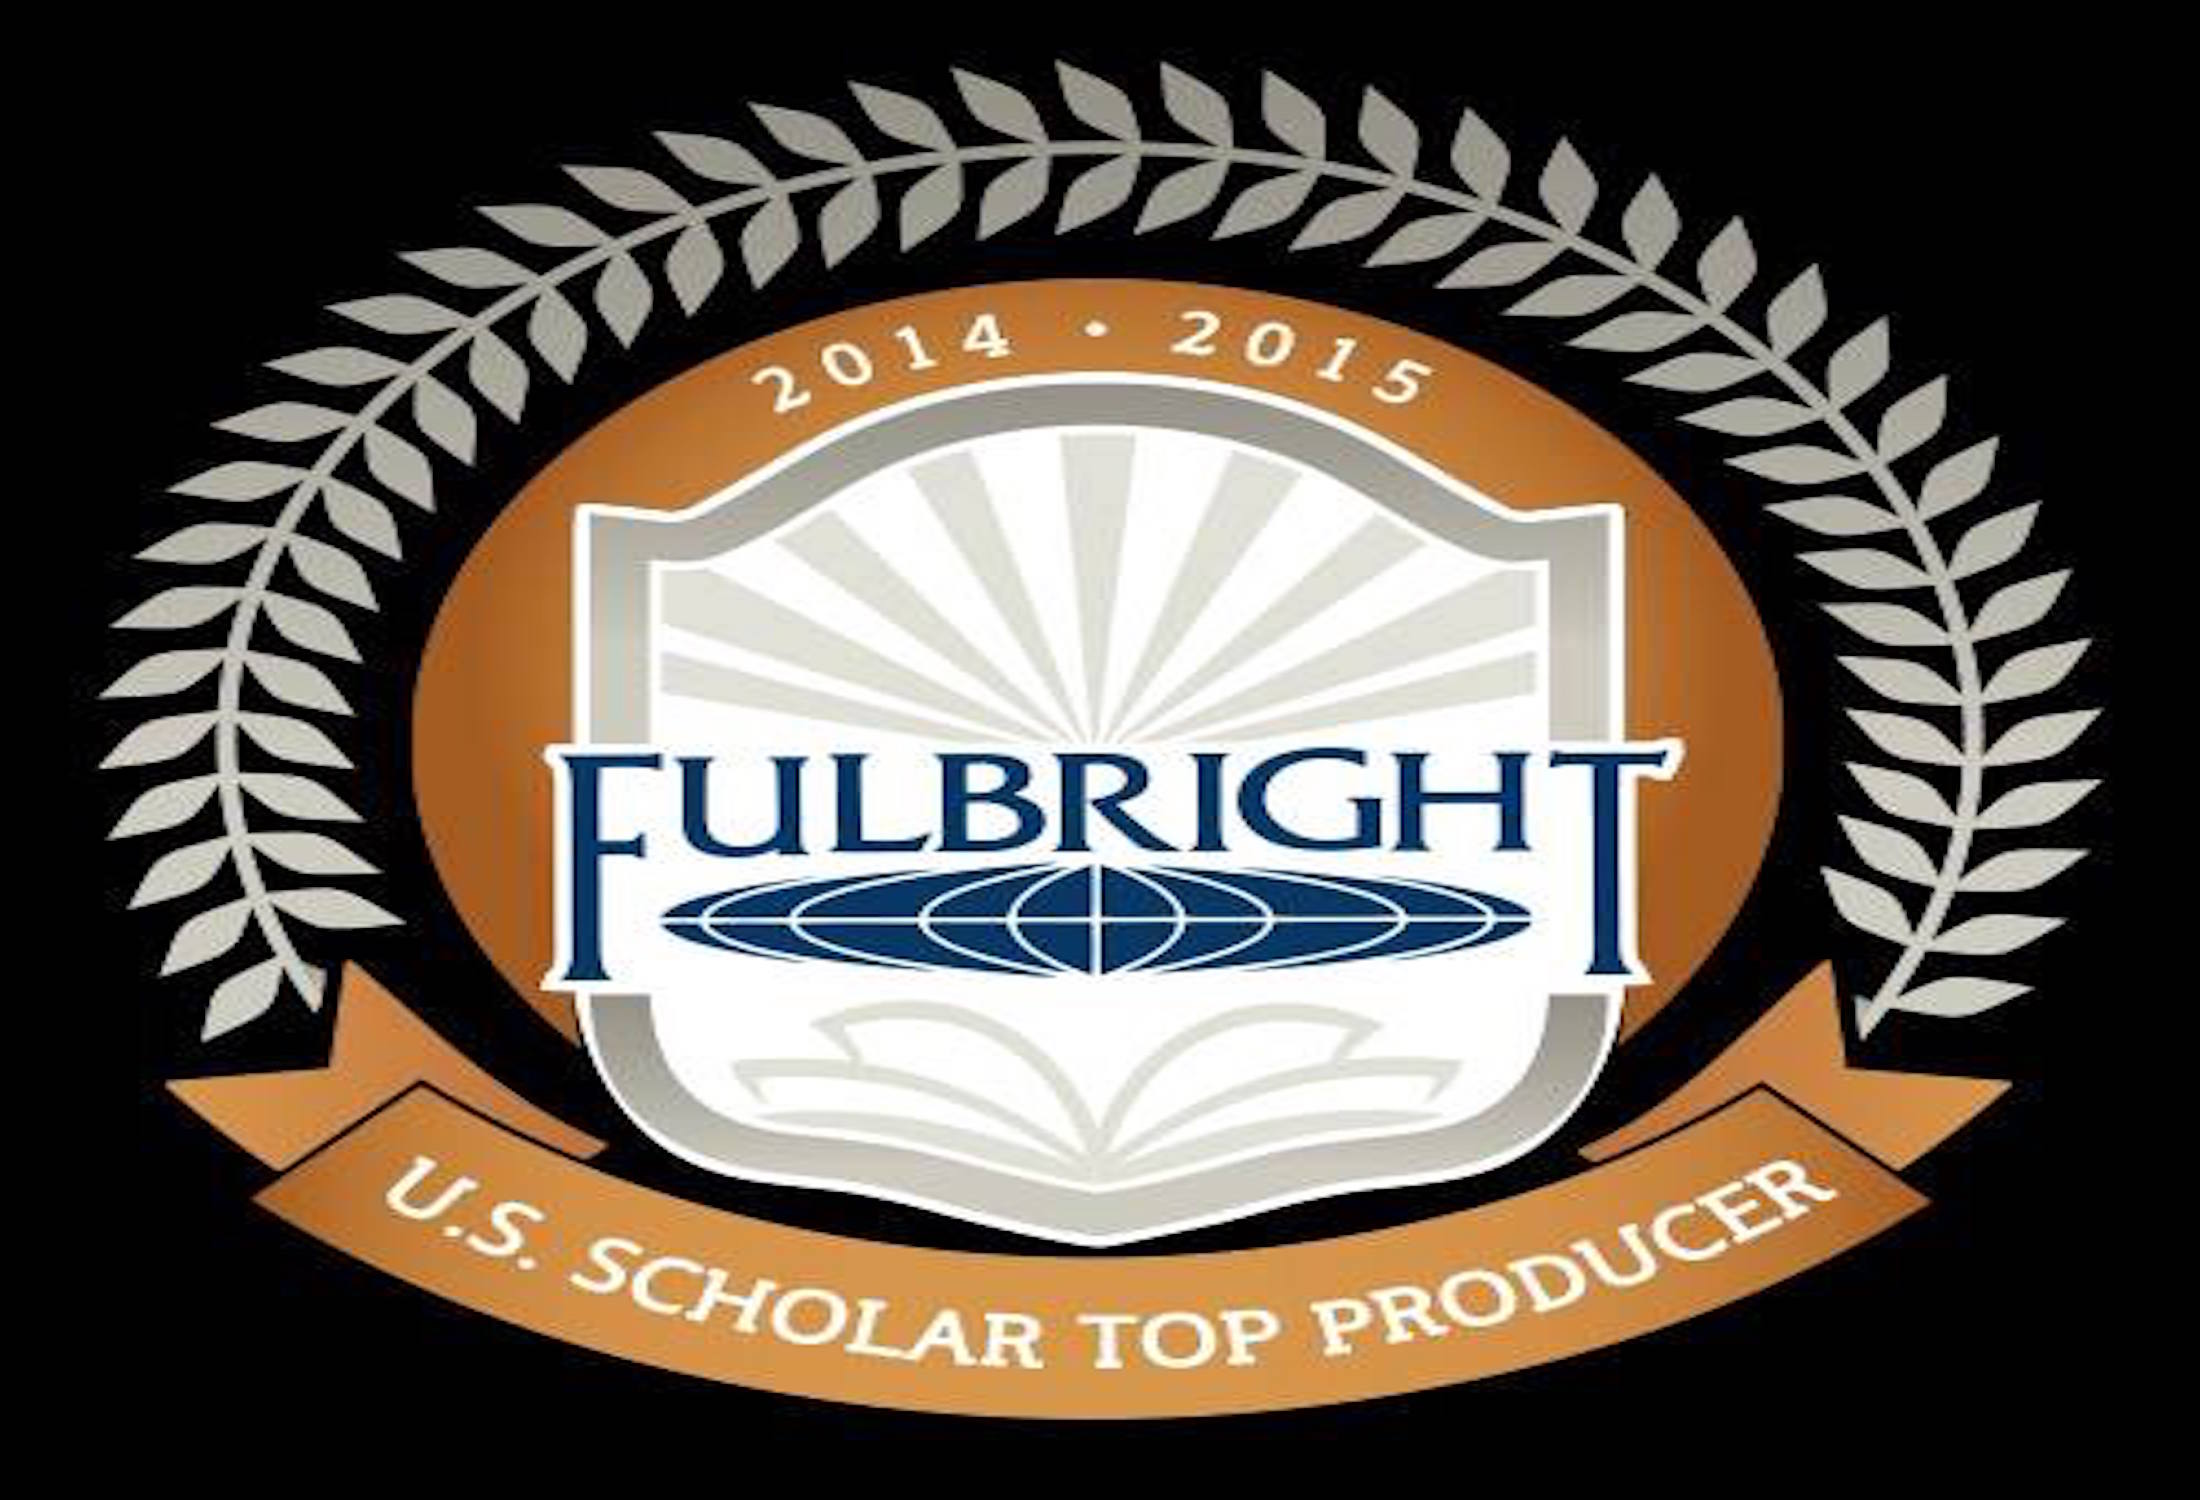 Fulbright Foreign Students Program & Fulbright Foreign Language Teaching Assistant (FLTA) program